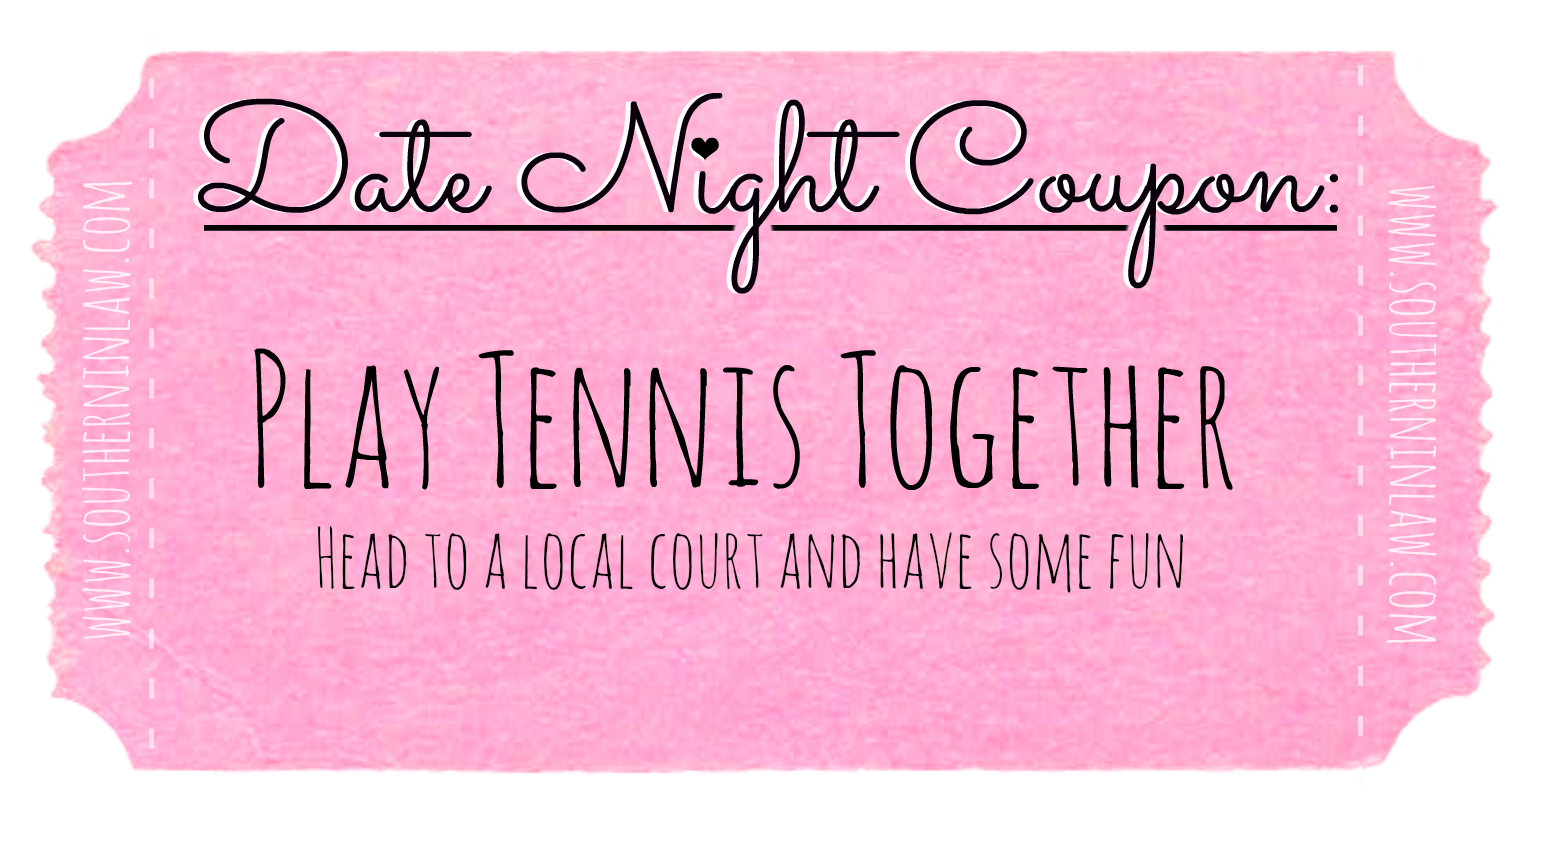 Affordable Date Ideas - Date Night Coupons - Play Tennis Together